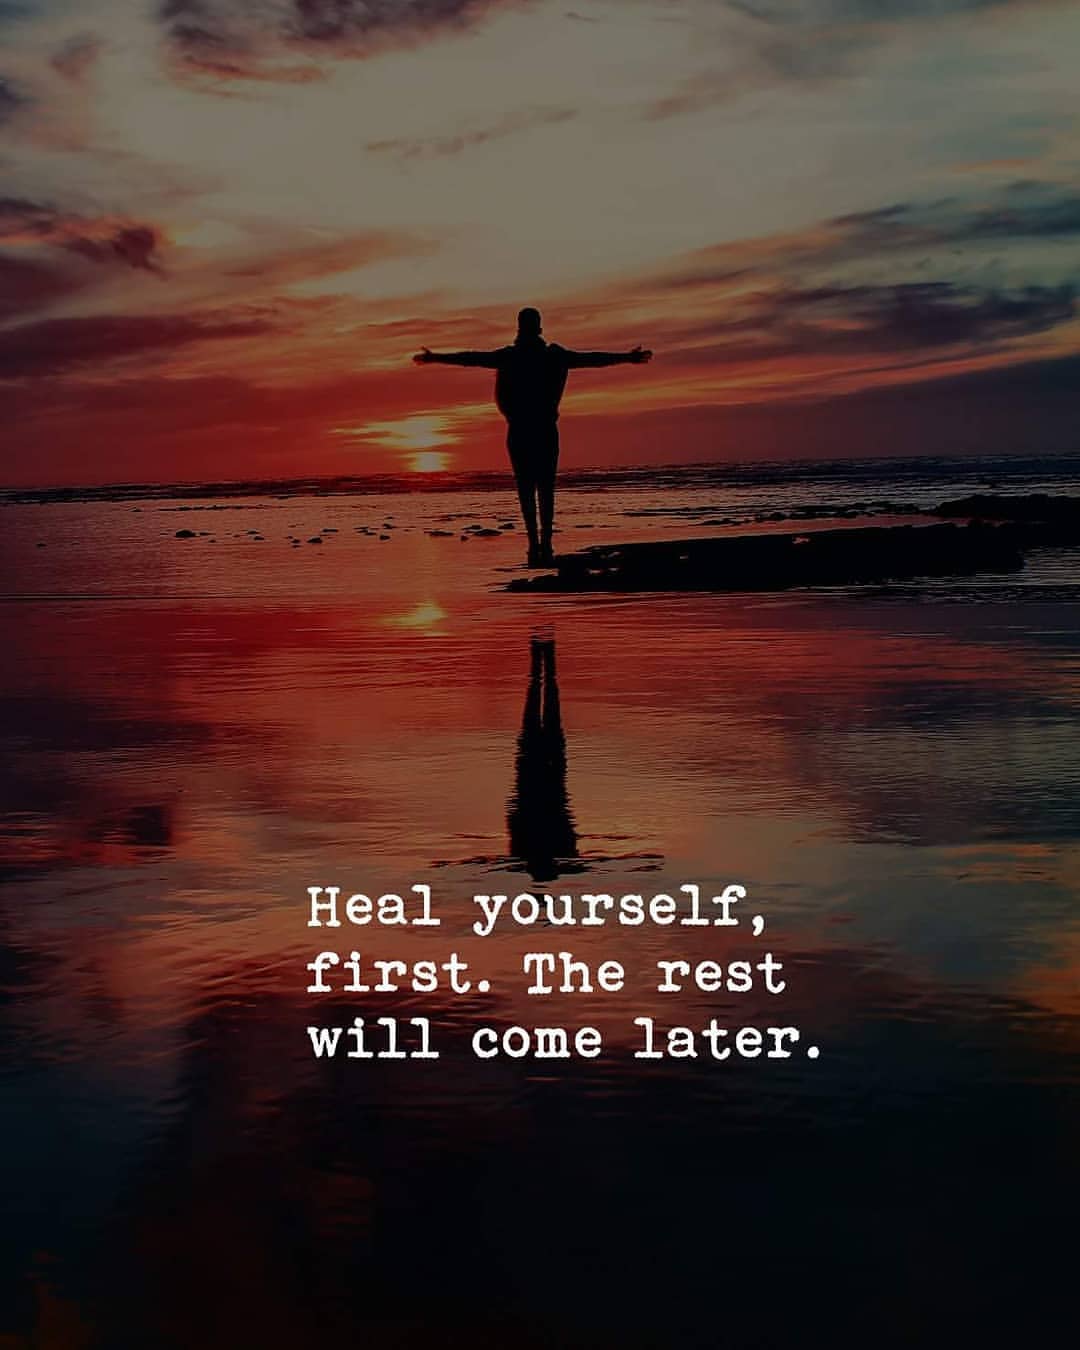 Heal yourself, first. The rest will come later